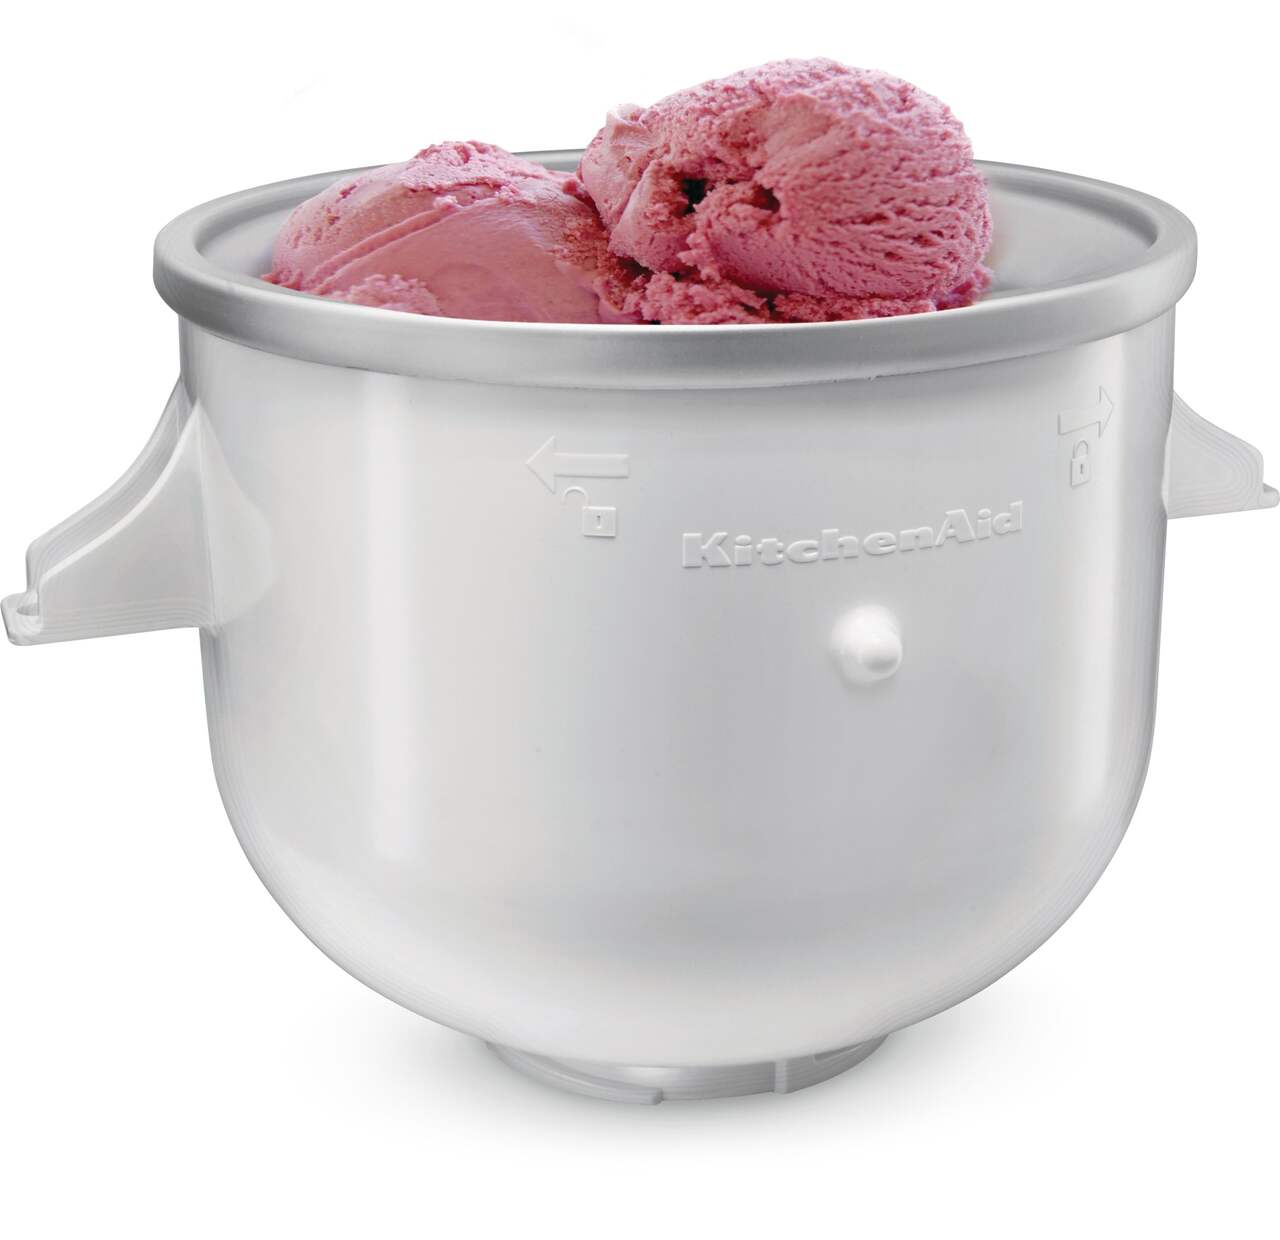 https://media-www.canadiantire.ca/product/living/kitchen/kitchen-appliances/0431437/kitchen-aid-ice-cream-maker-f14eec85-06be-444a-af62-994cd0456eed-jpgrendition.jpg?imdensity=1&imwidth=1244&impolicy=mZoom